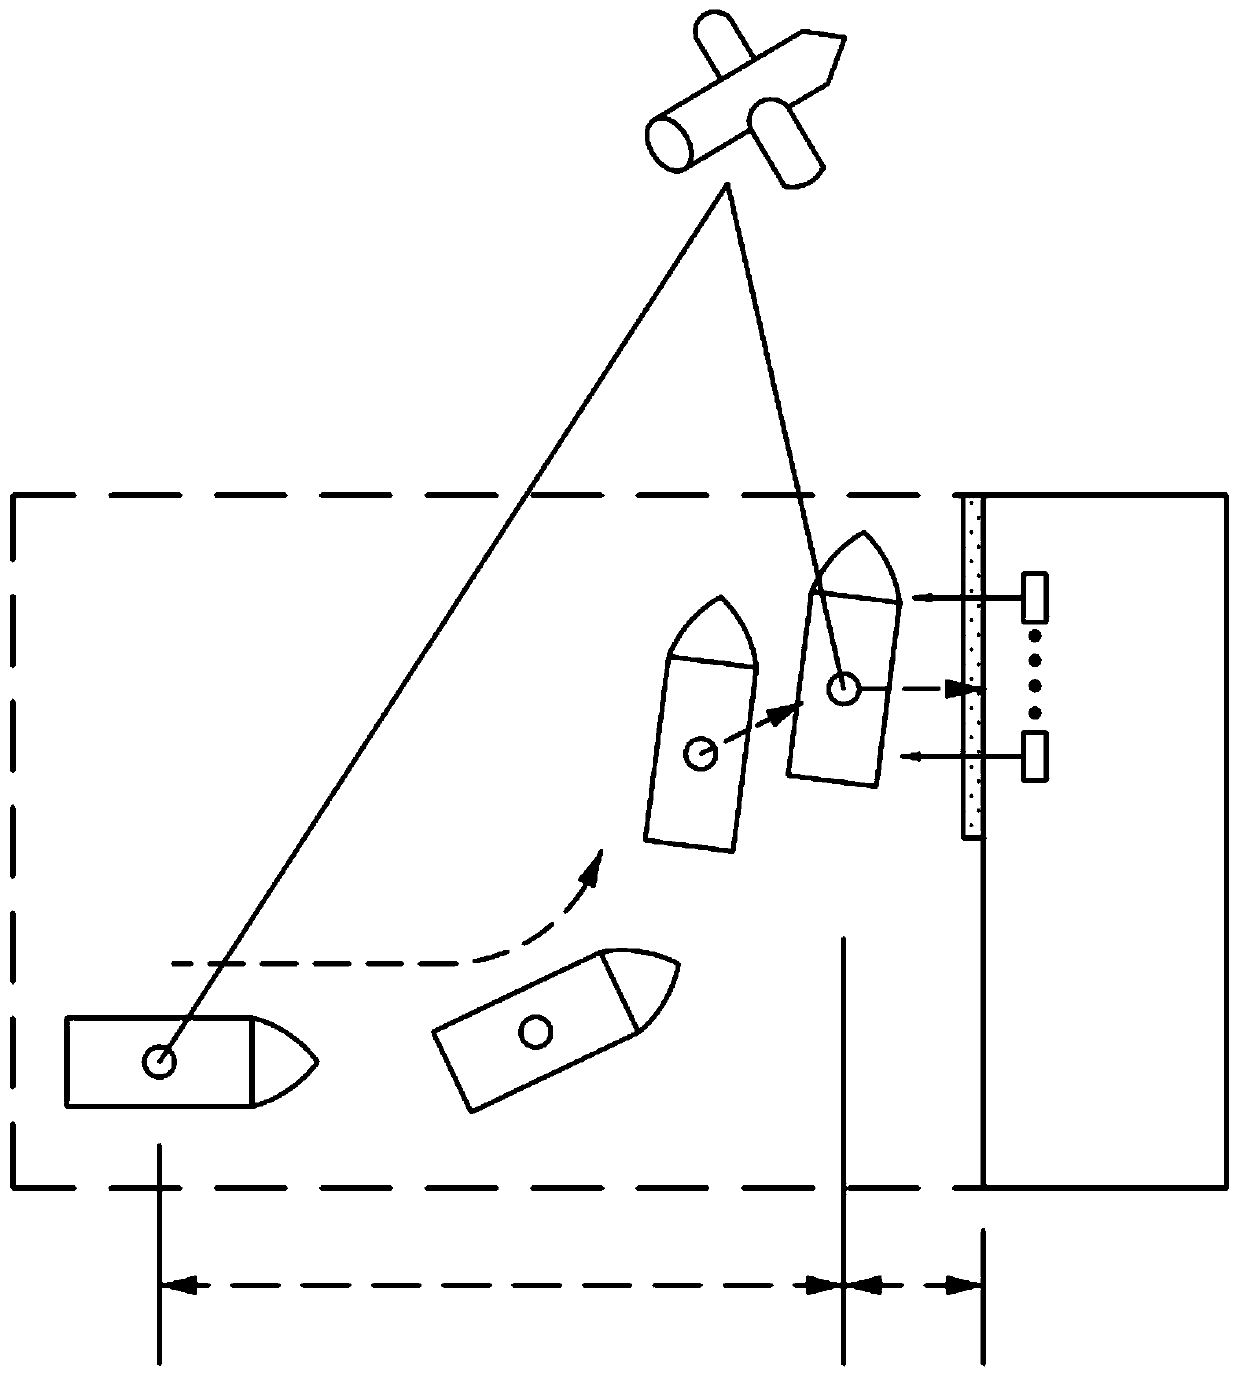 Control system for assisting ship to enter and exit port by utilizing DP